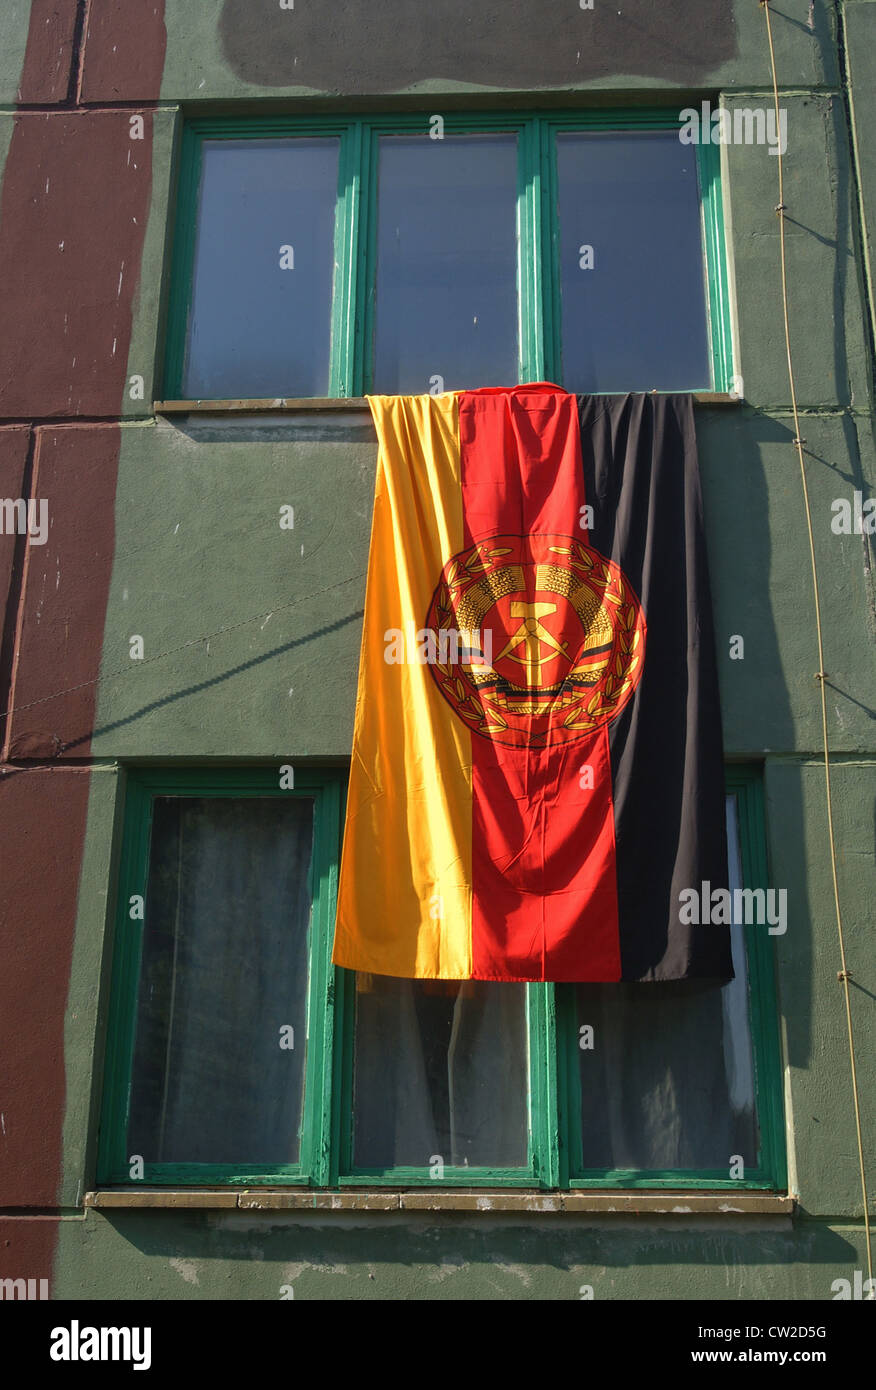 A GDR flag hangs from a window Stock Photo